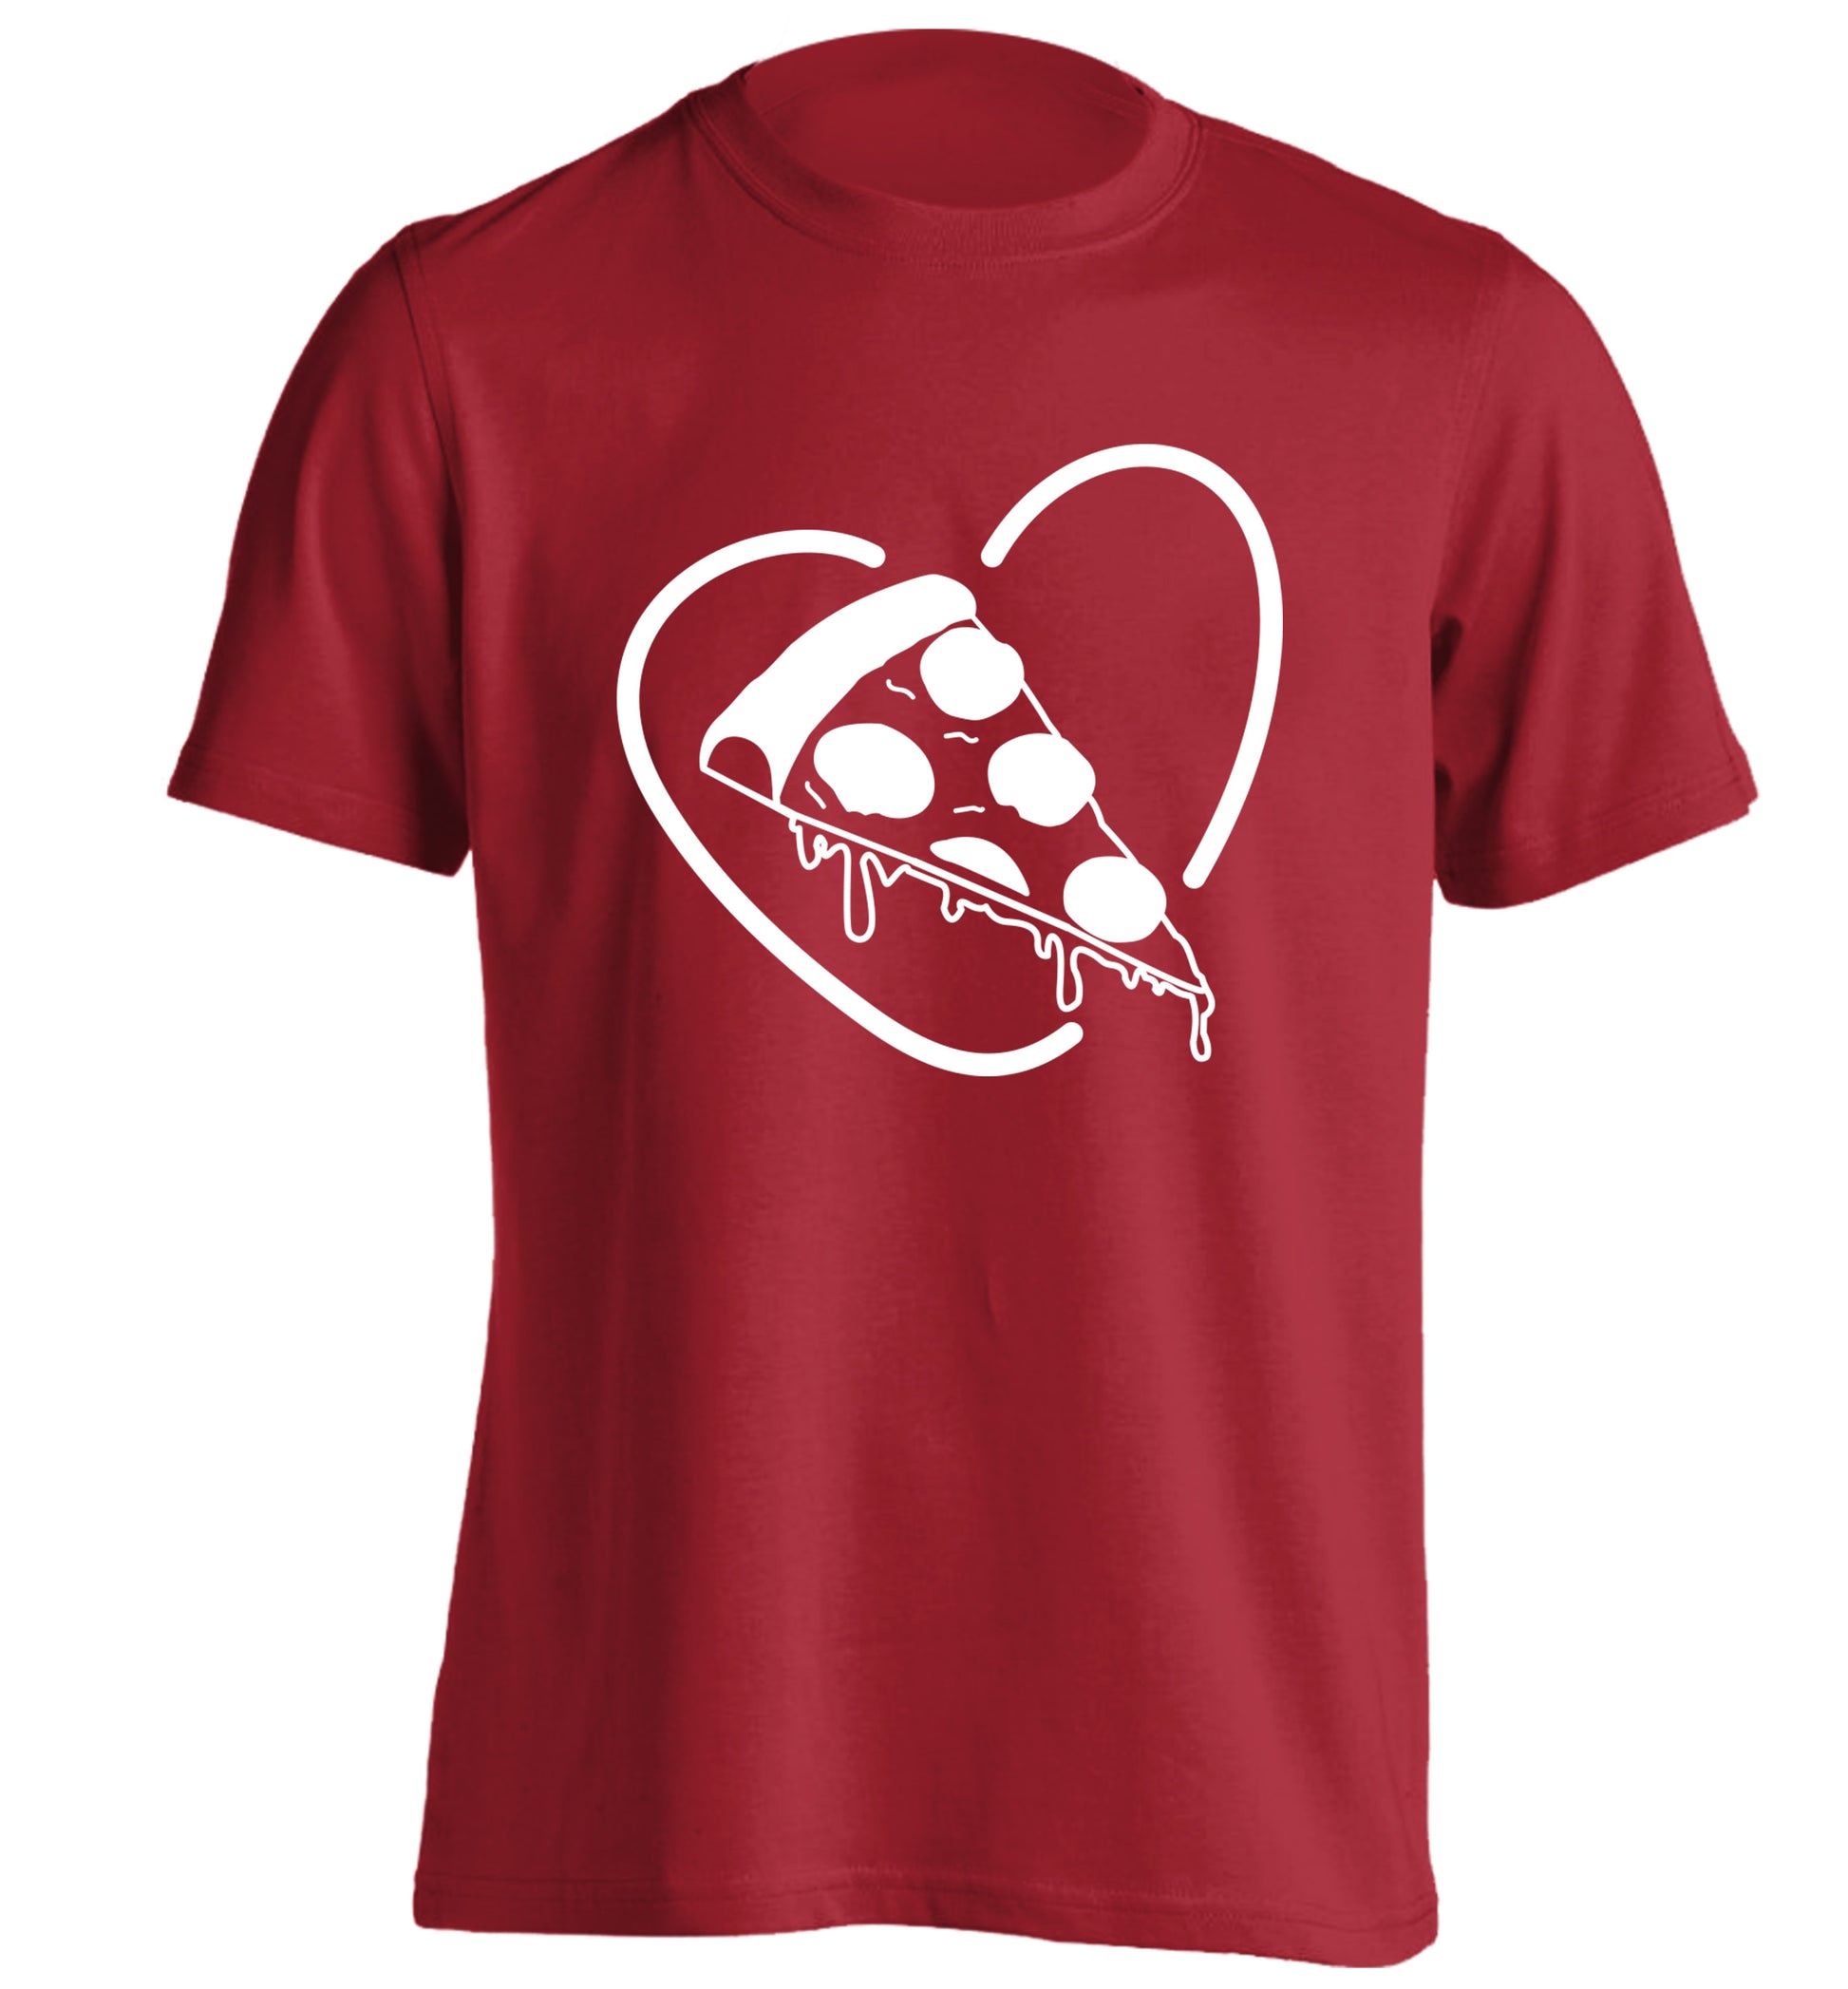 Pizza heart adults unisex red Tshirt 2XL